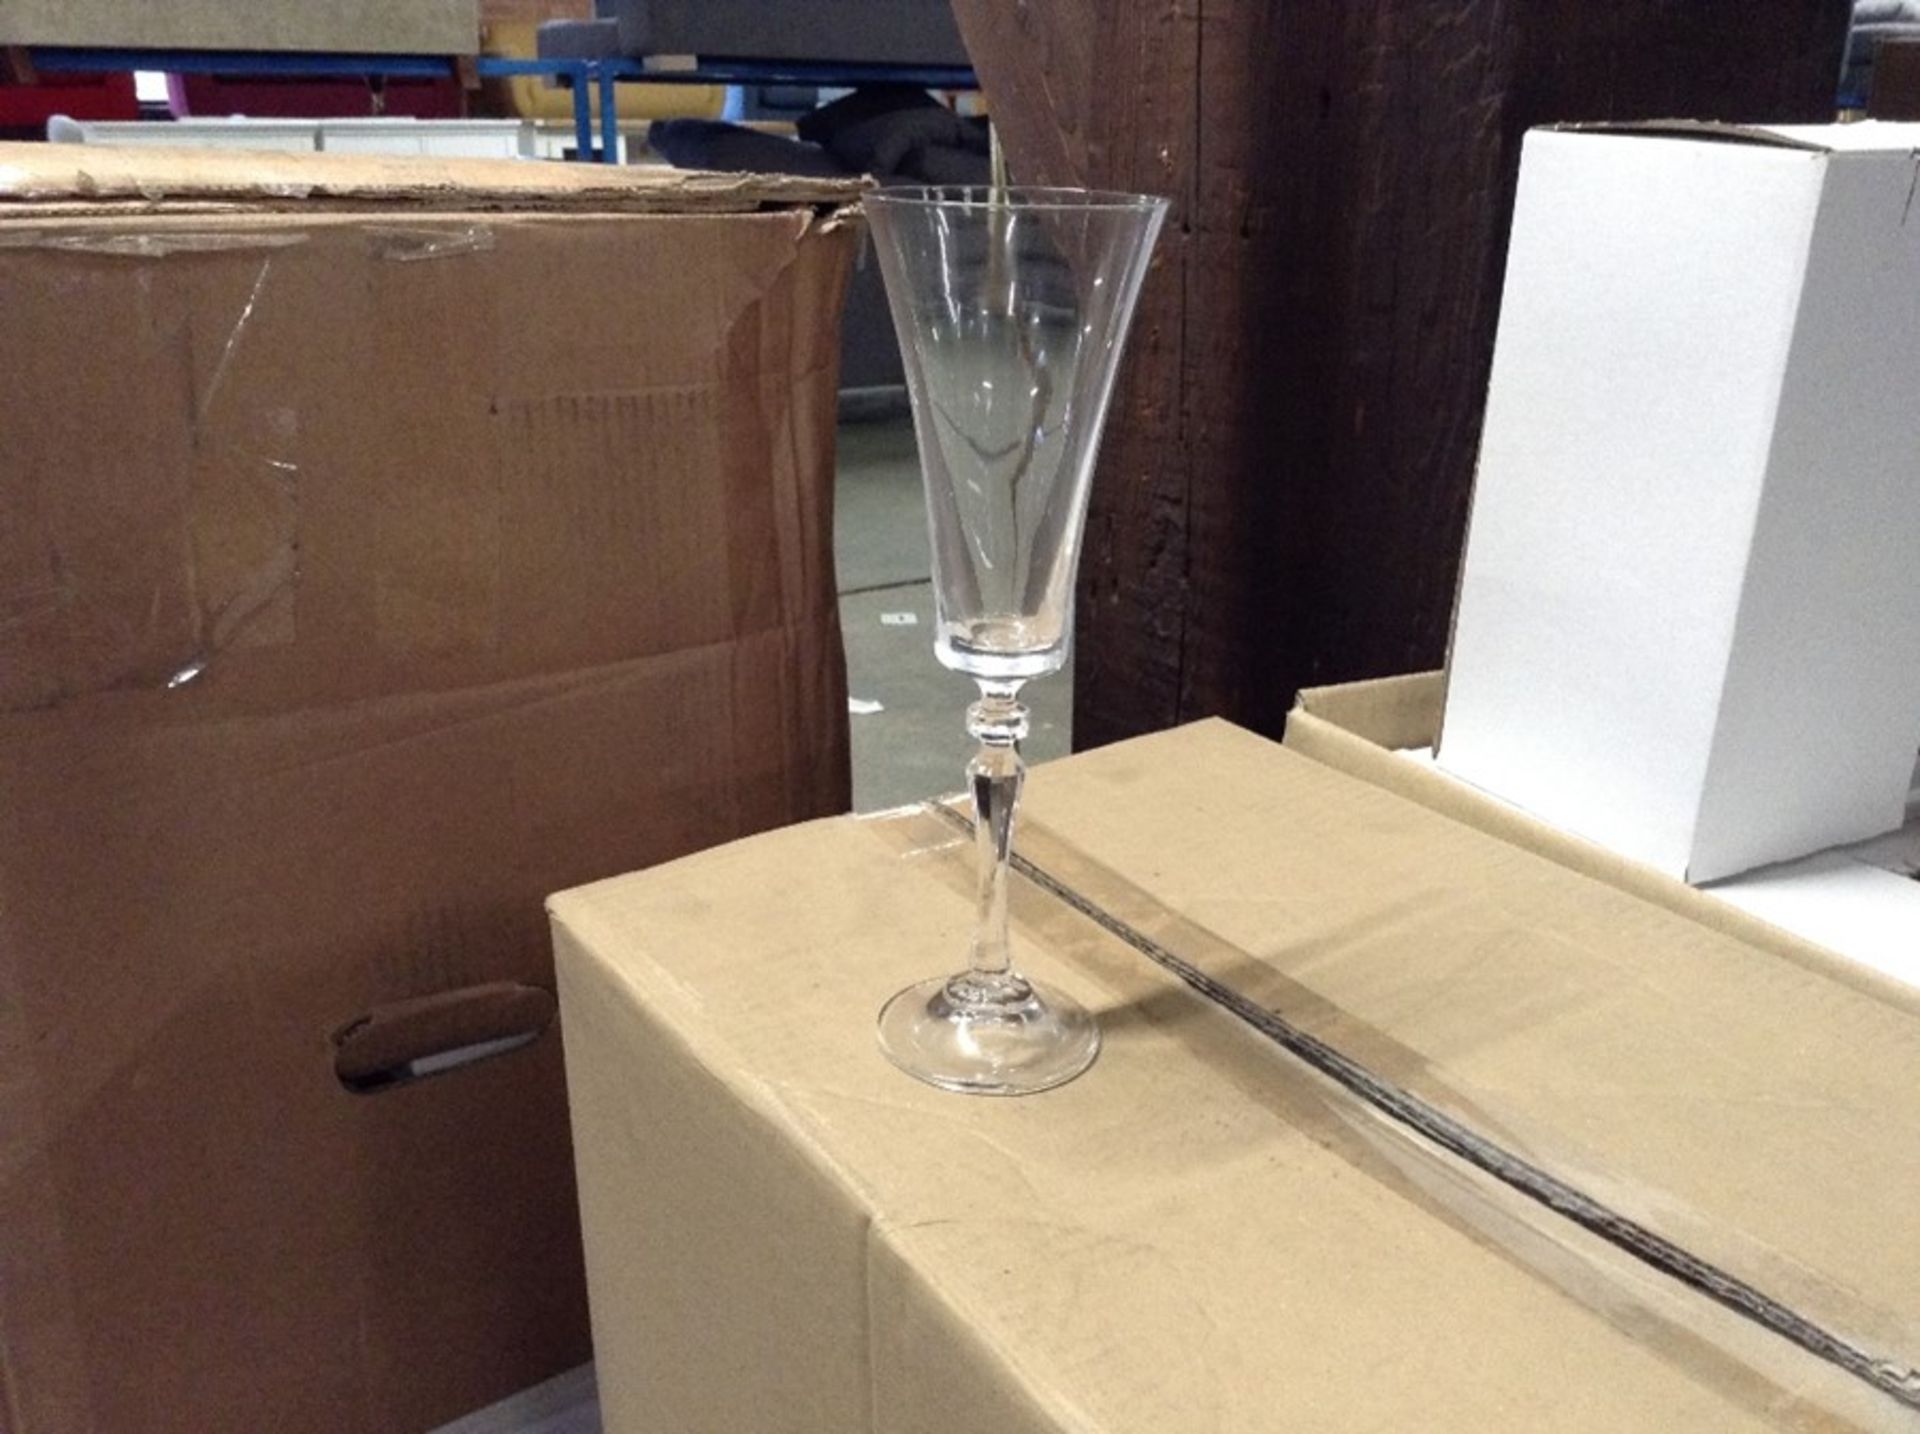 BOX OF APPROX 20 CHAMPAGNE FLUTE GLASSES